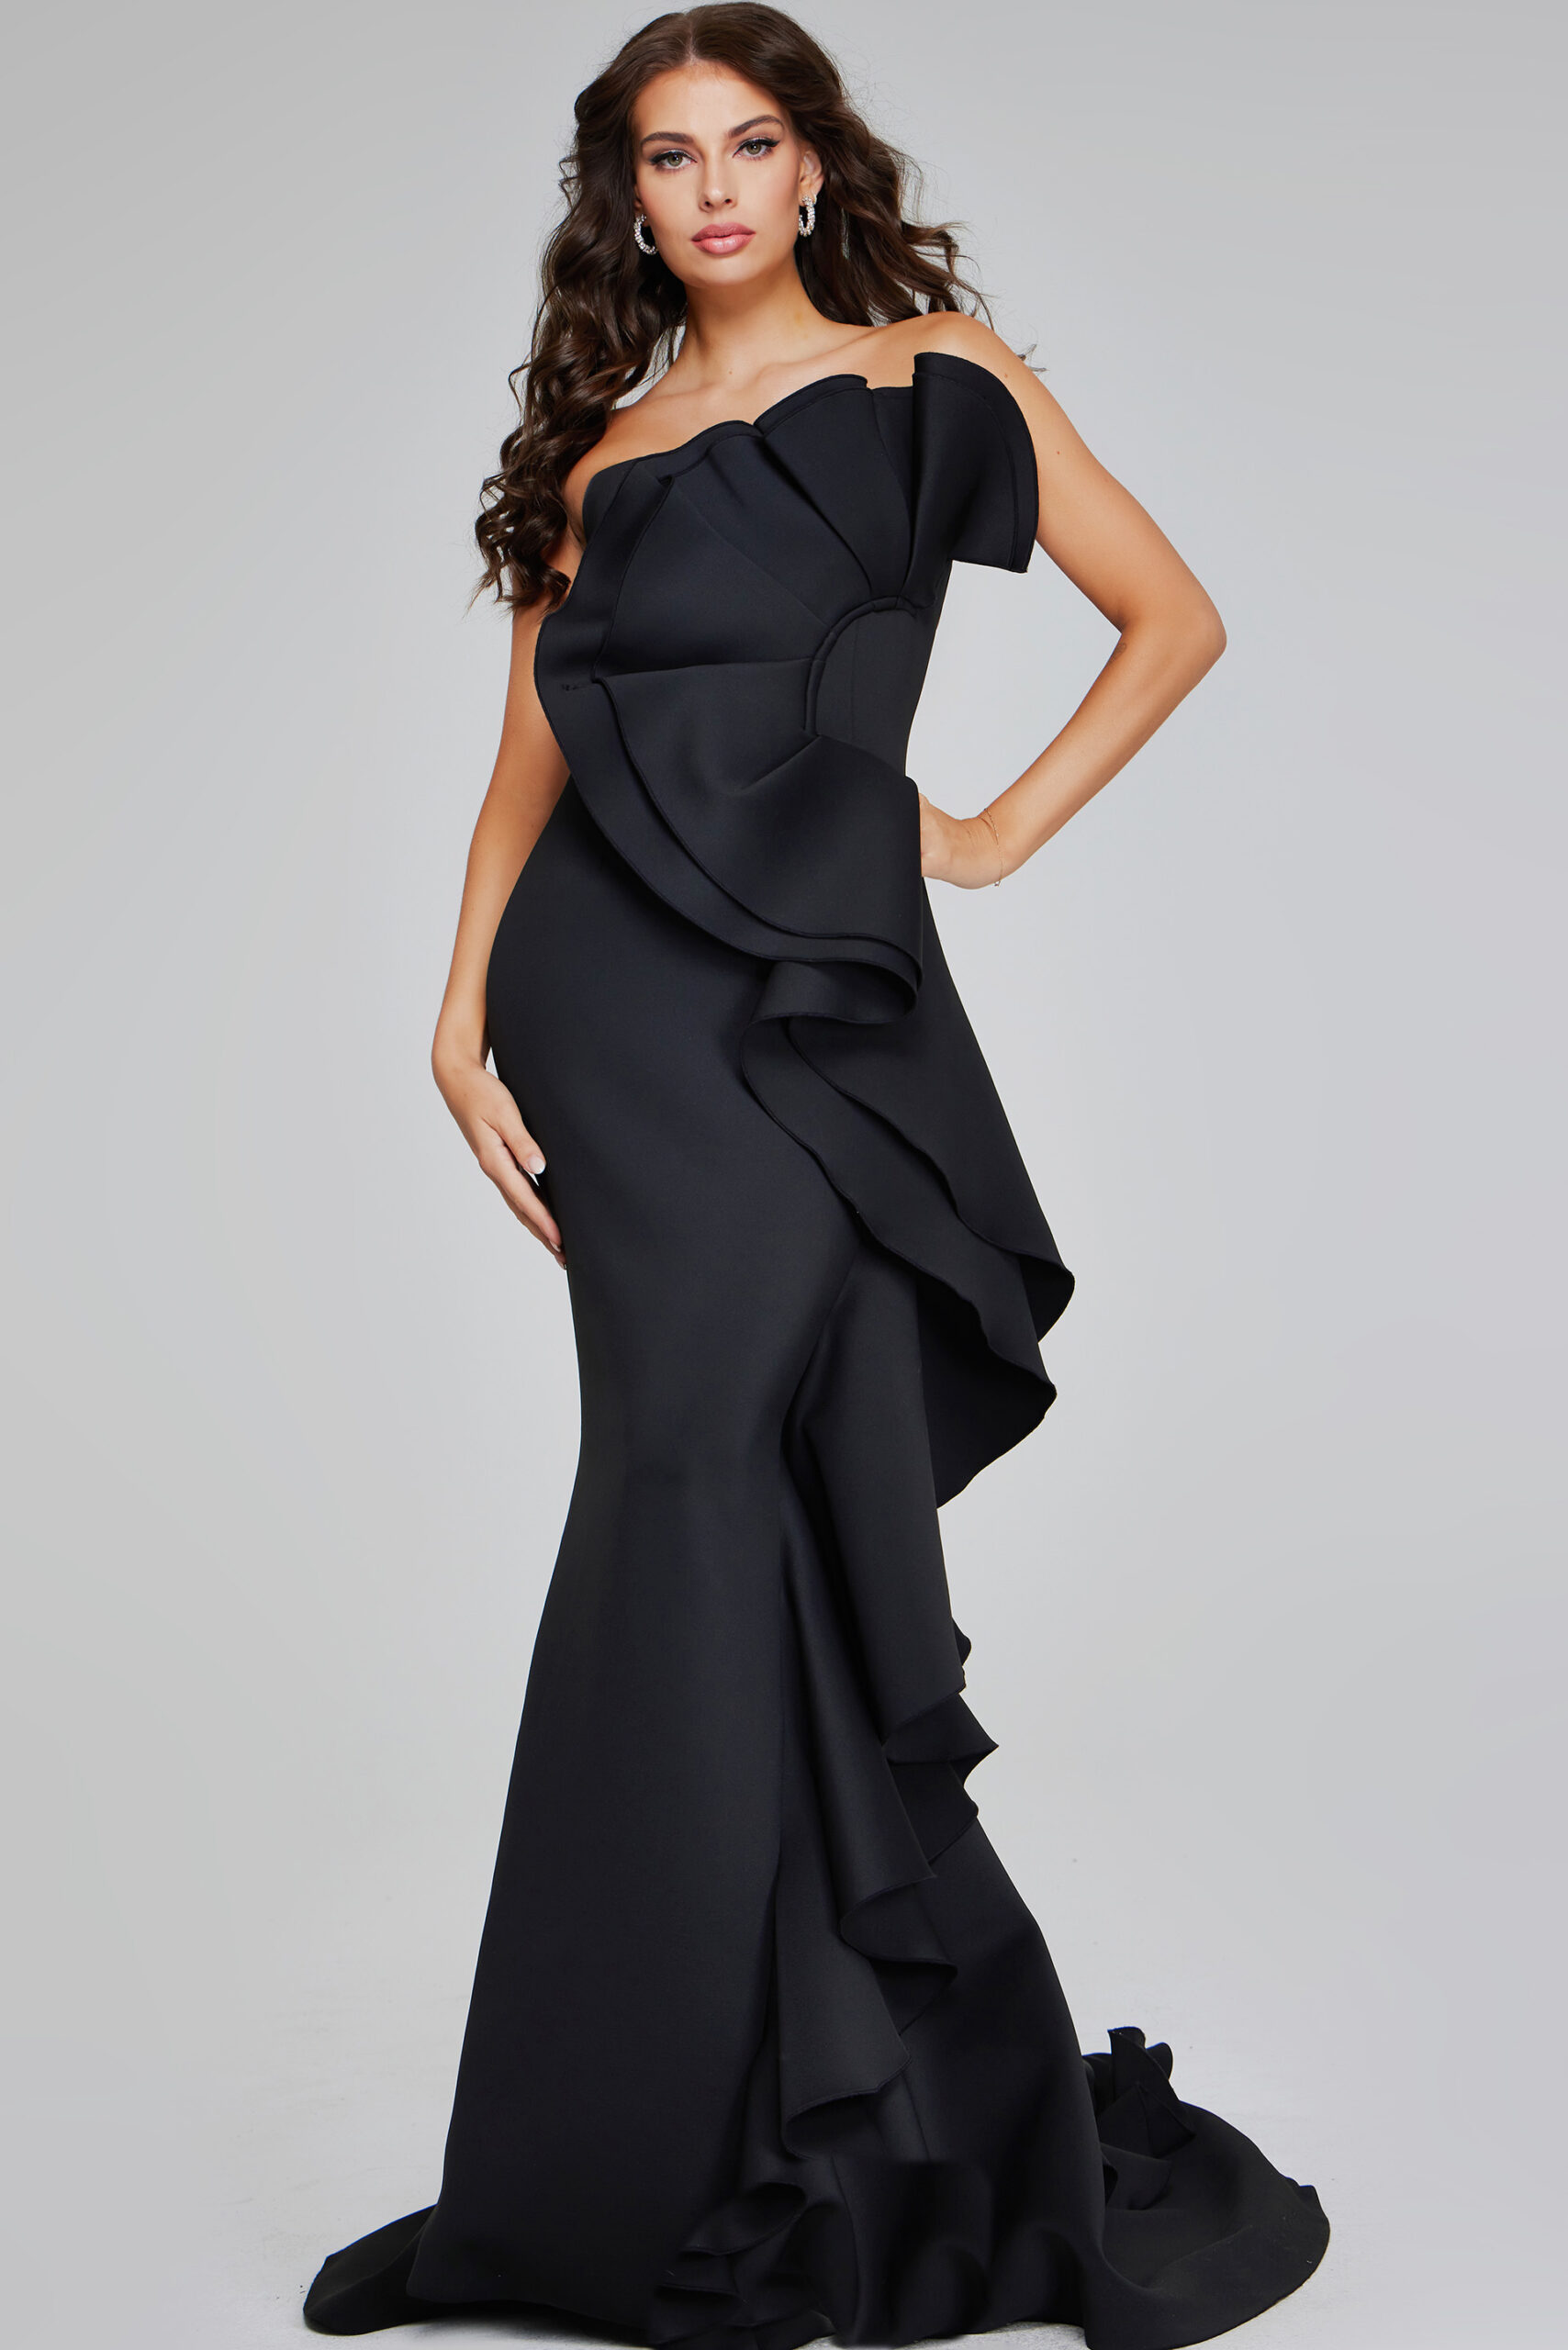 Strapless Black Ruffled Gown 42543